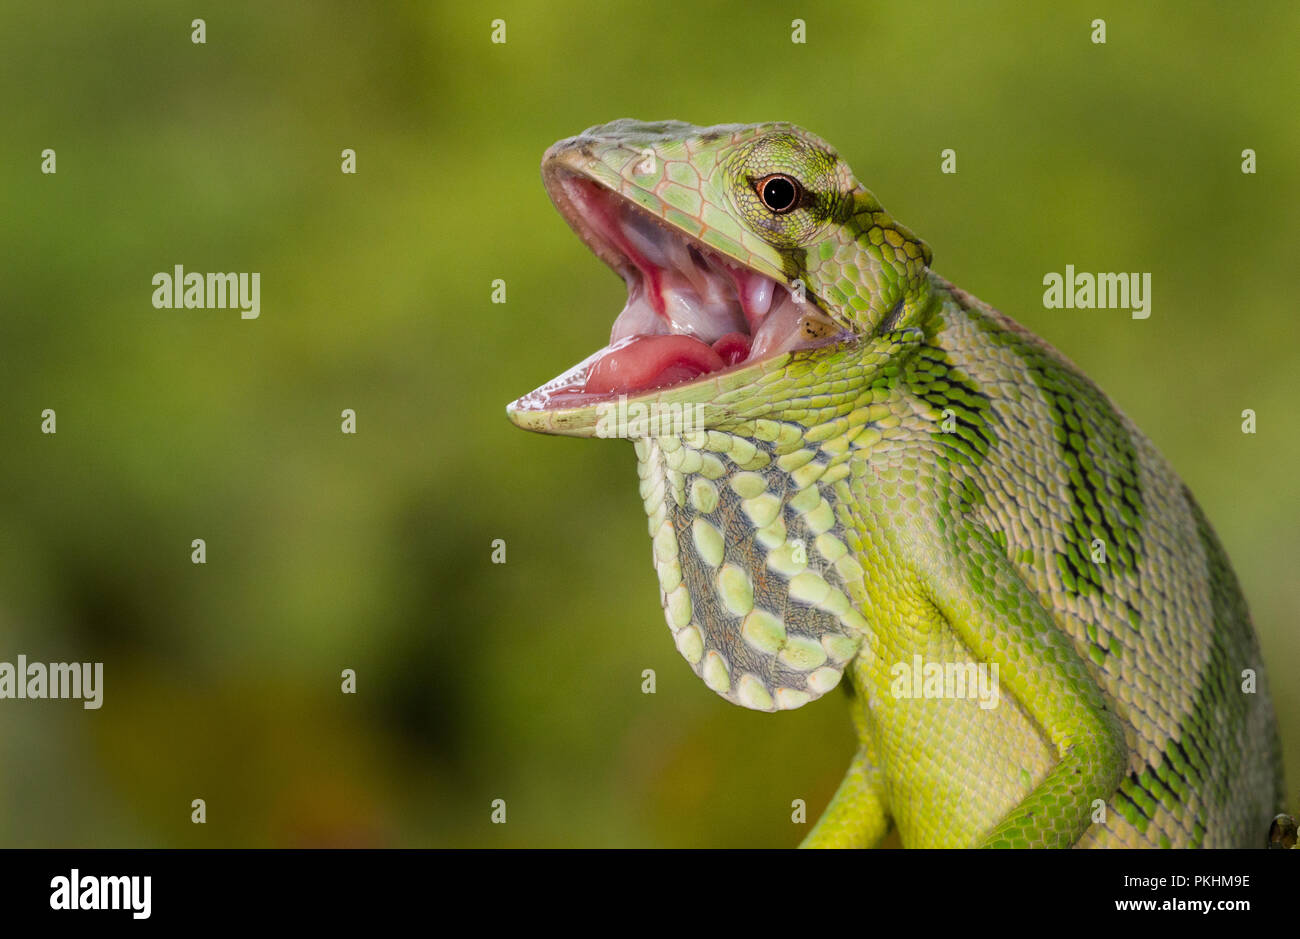 A canopy lizard with open mouth photographed in Costa Rica Stock Photo